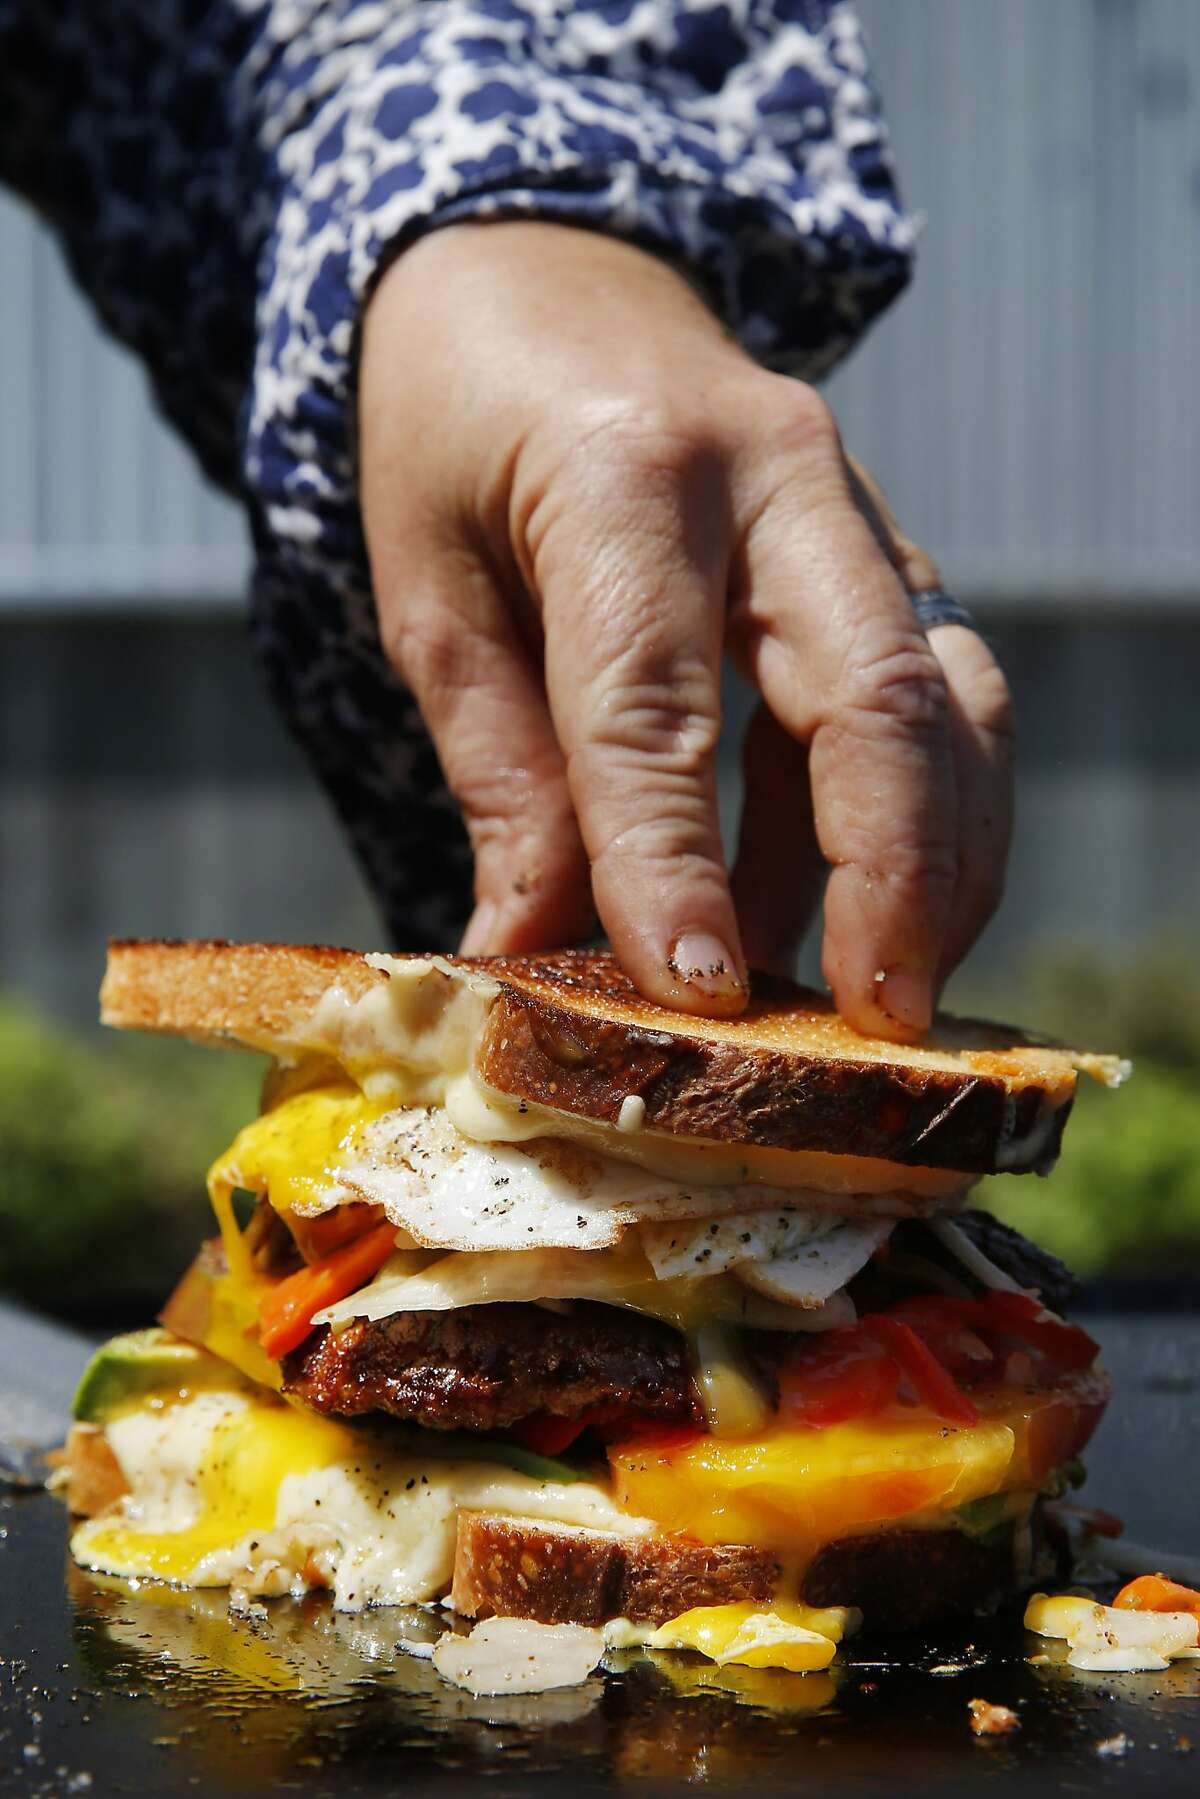 The Works sandwich made by Kendra Kolling of The Farmer's Wife is seen at The Barlow on Tuesday, Aug. 22, 2017, in Sebastopol, Calif.